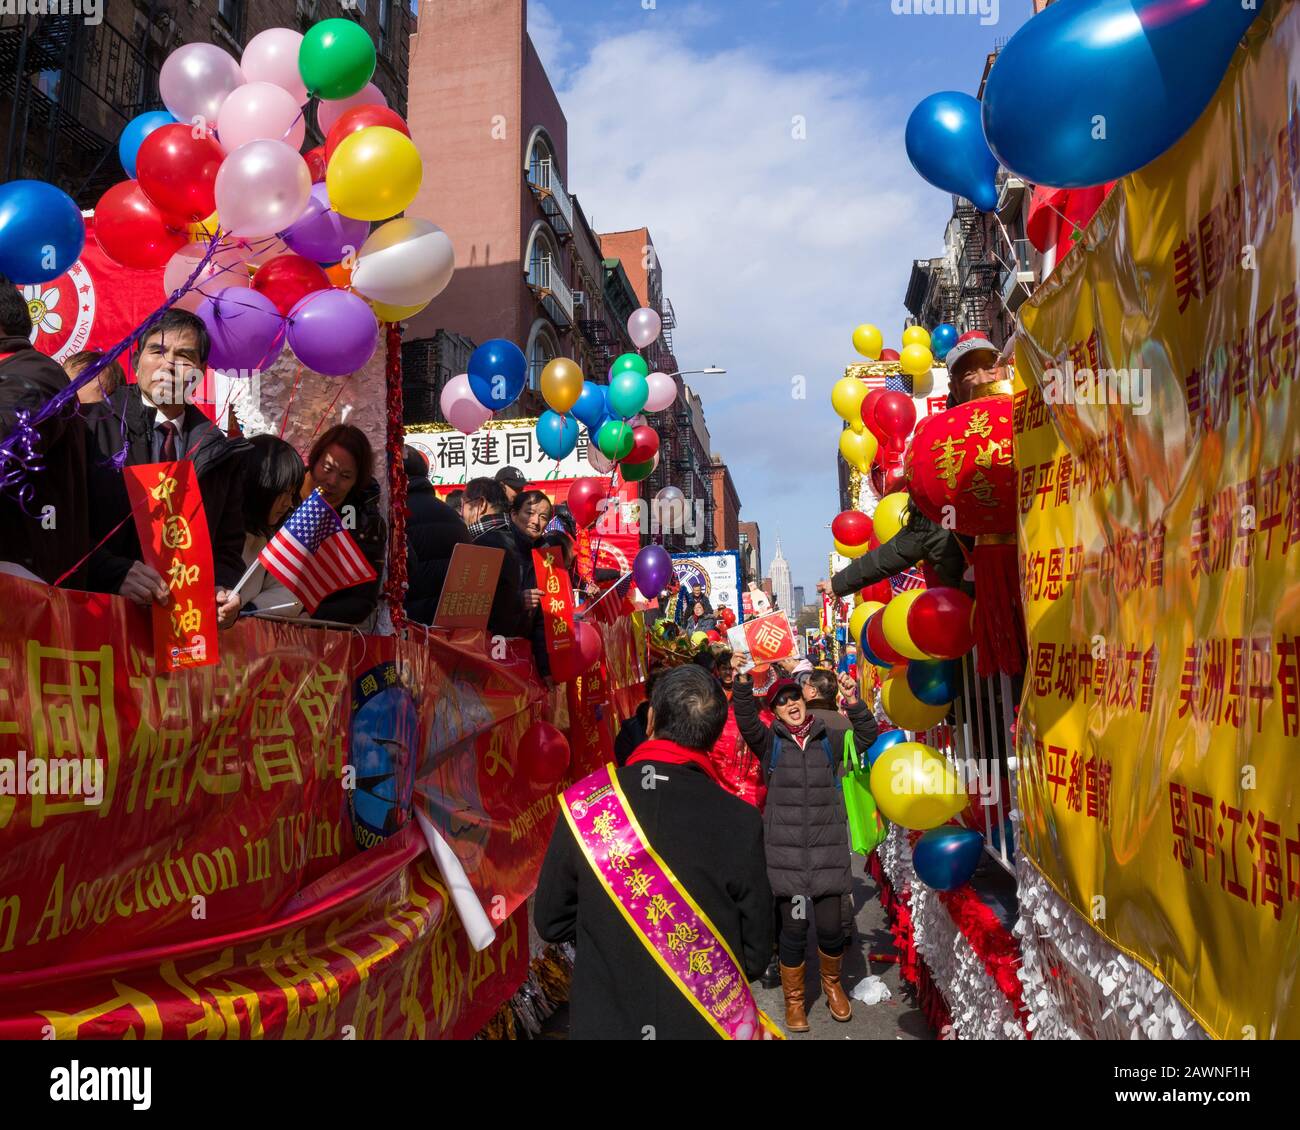 New York, USA. 9th Feb, 2020. People participate in the colorful Chinese New Year parade in Chinatown. Credit: Enrique Shore/Alamy Live News Stock Photo